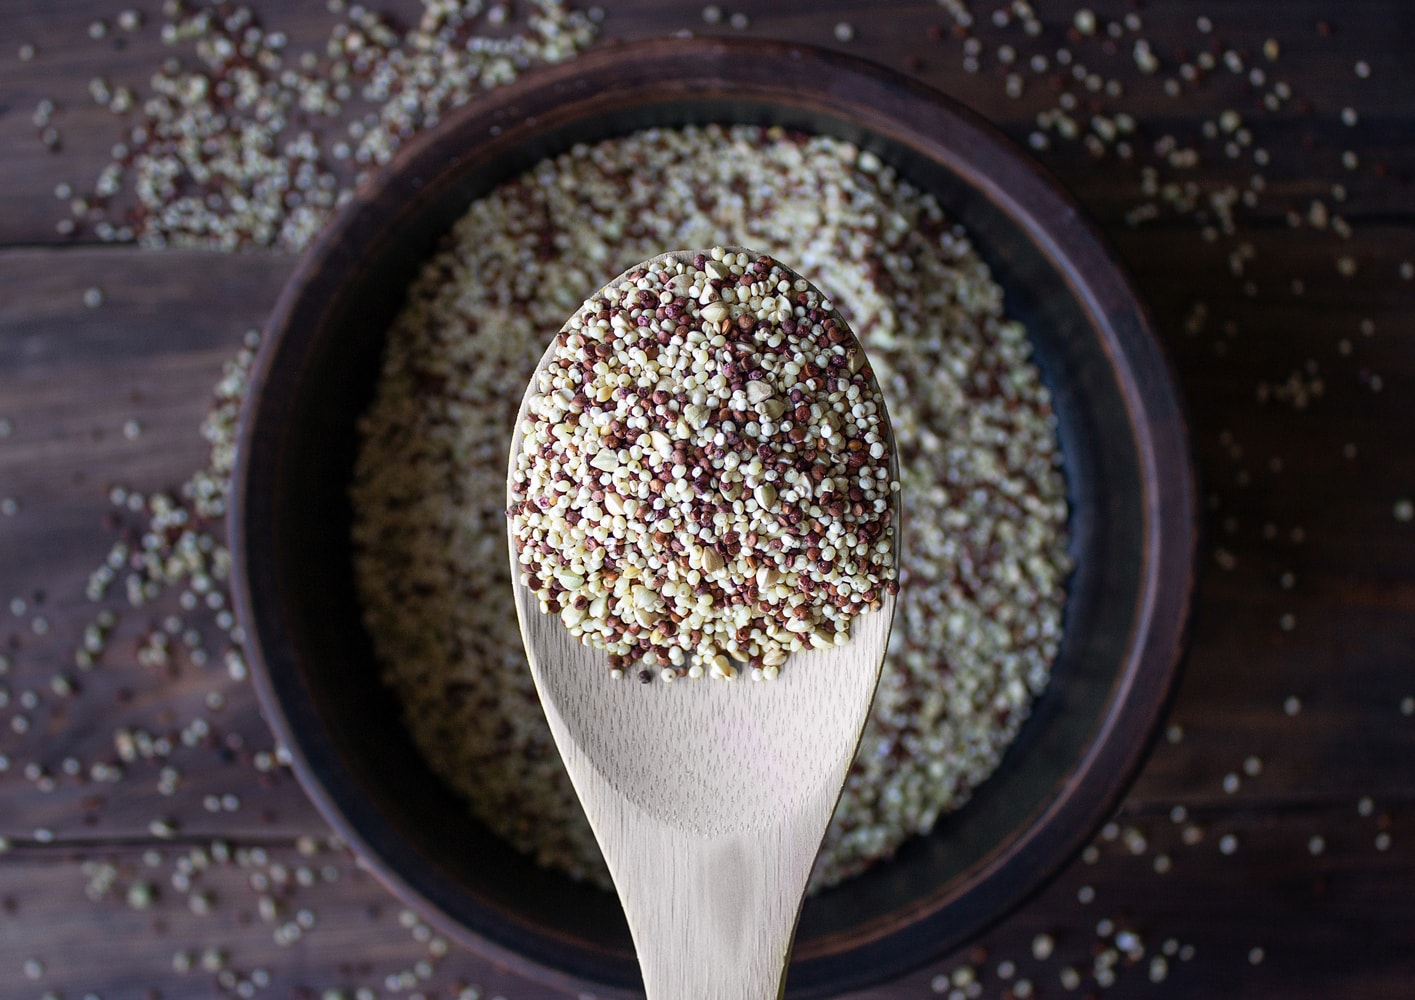 Organic Super Grains Blend — A Mix of Millet, Buckwheat, Red and White Quinoa. Non-GMO, Non-Irradiated, Vegan, Bulk - by Food to Live